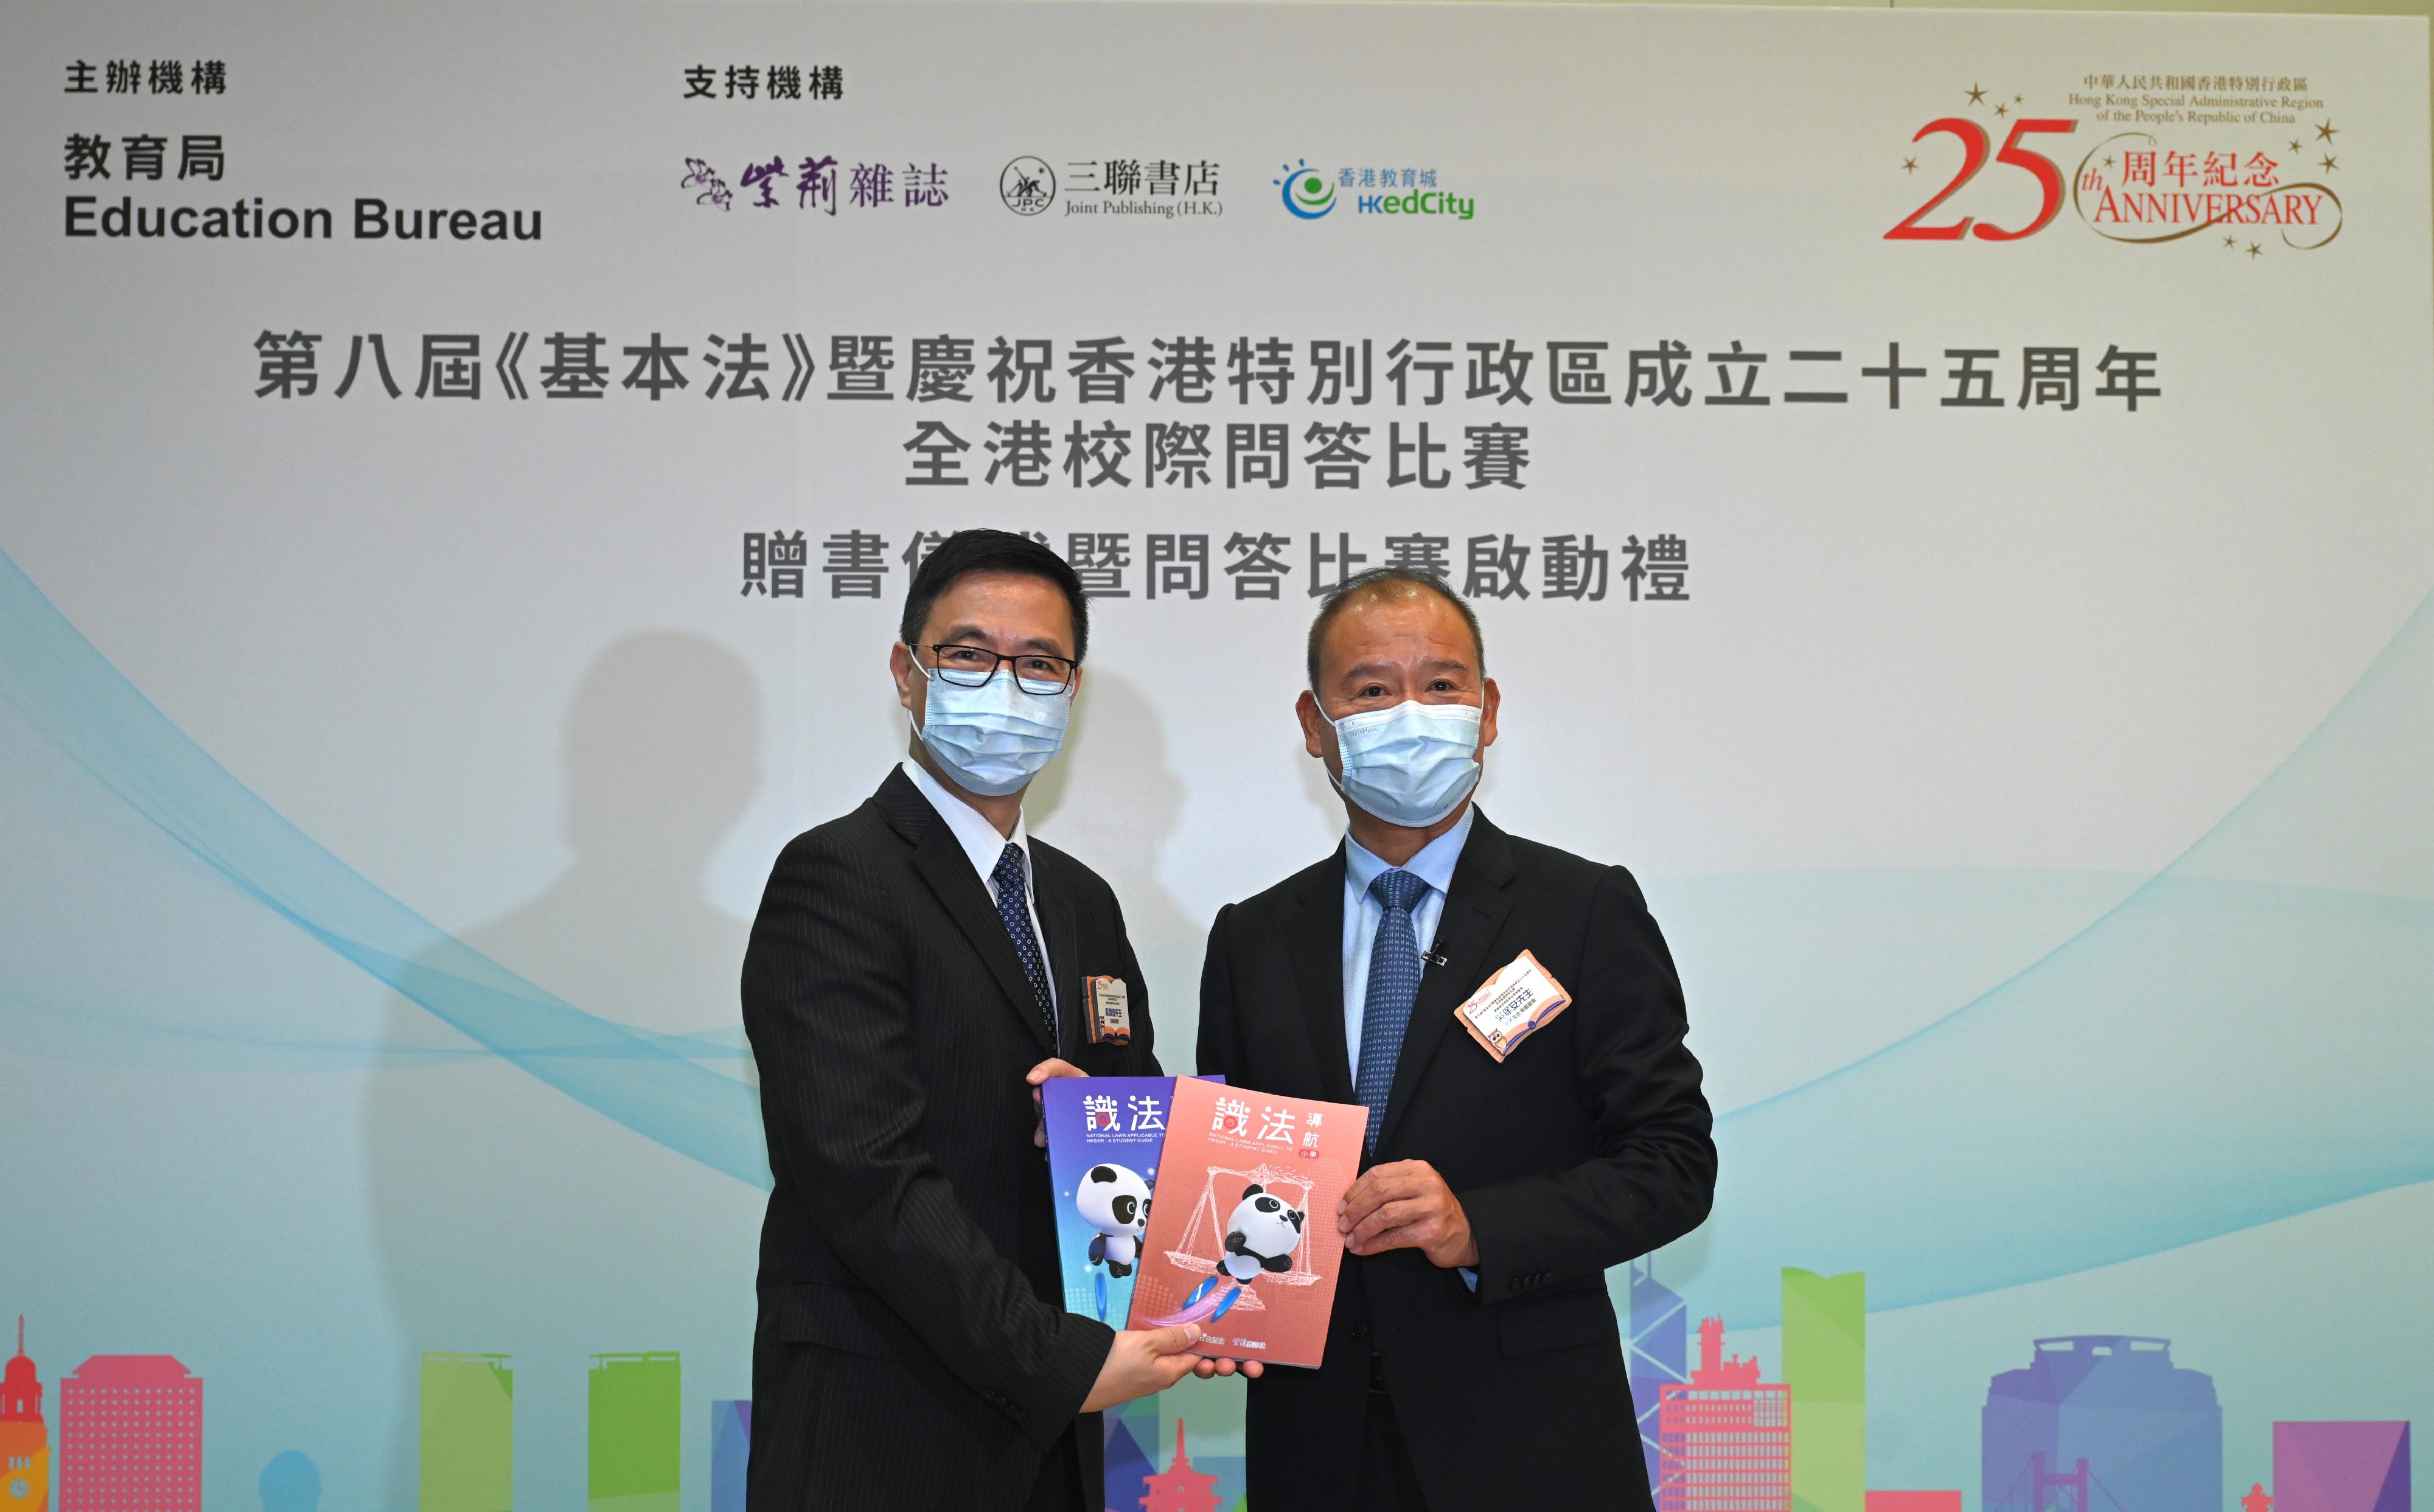 The Secretary for Education, Mr Kevin Yeung (left), receives on behalf of schools "National Laws Applicable to HKSAR: A Student Guide" from Member of the Board of Bauhinia Culture Group Mr Wu Baoan (right) at the 8th Basic Law cum the 25th Anniversary of Establishment of the Hong Kong Special Administrative Region Territory-wide Inter-school Competition Kick-off cum Books Giving Ceremony today (January 5).